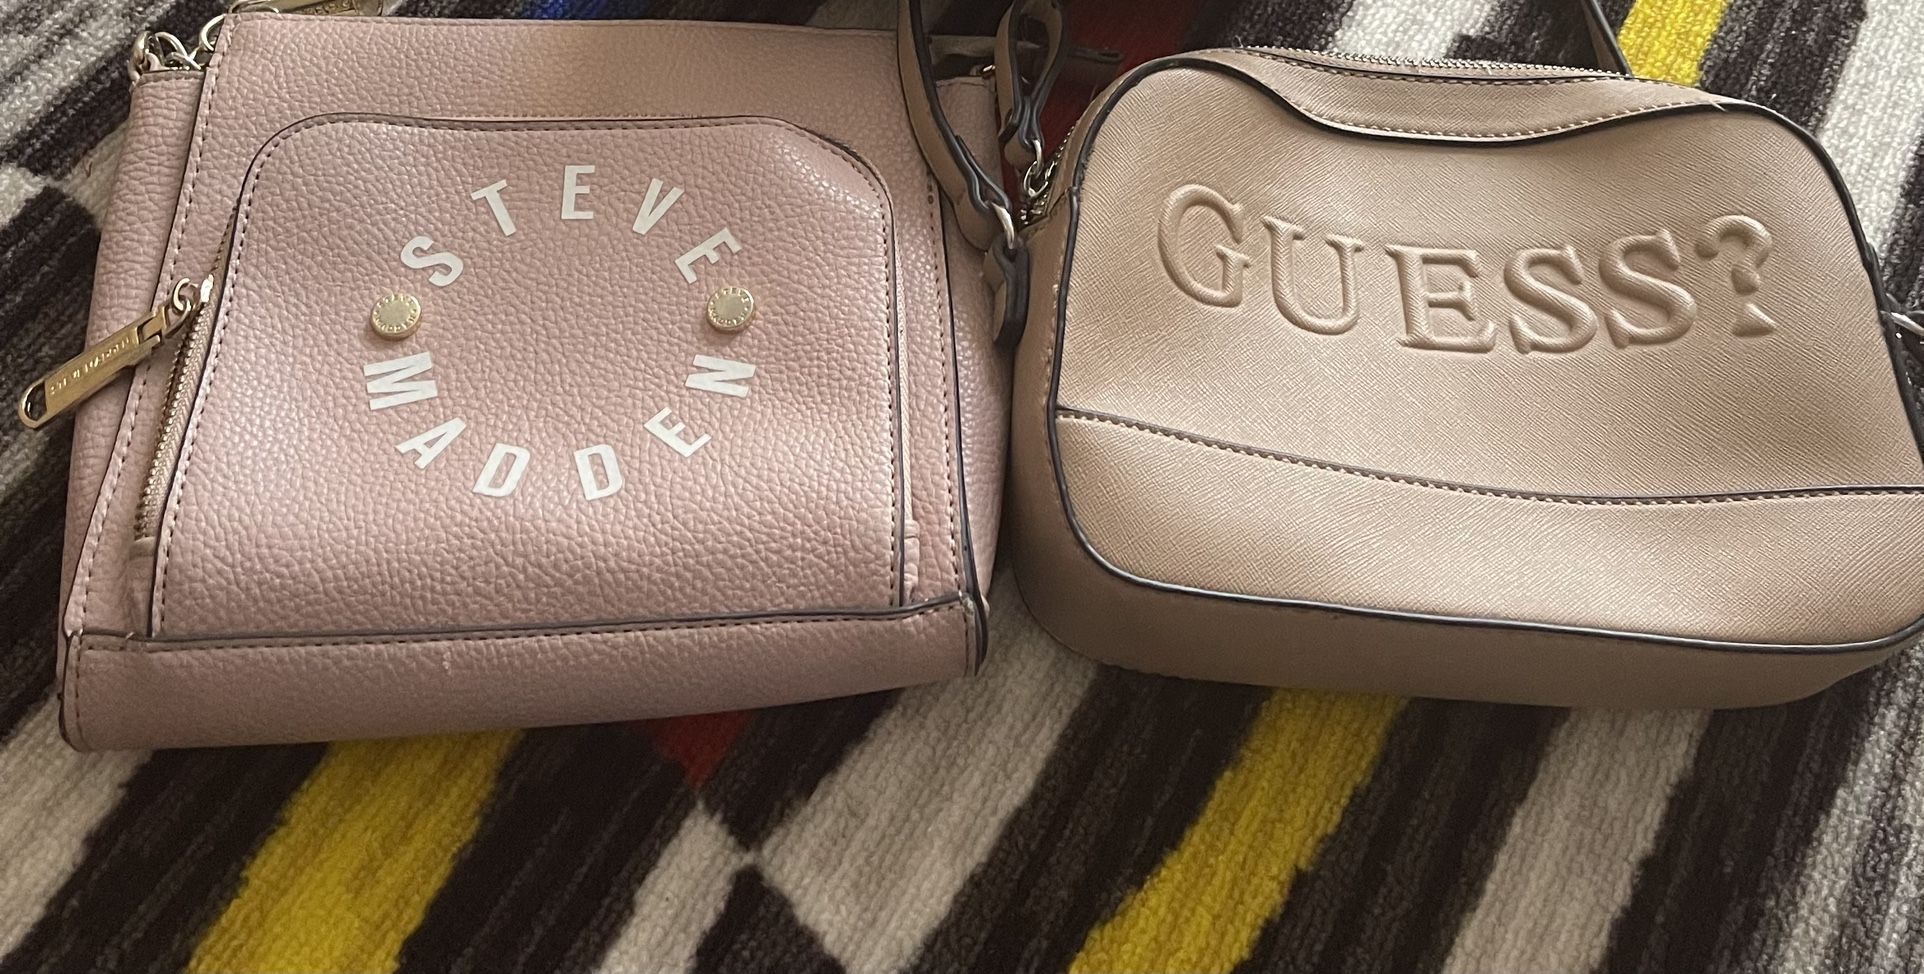 2 Purse For $20